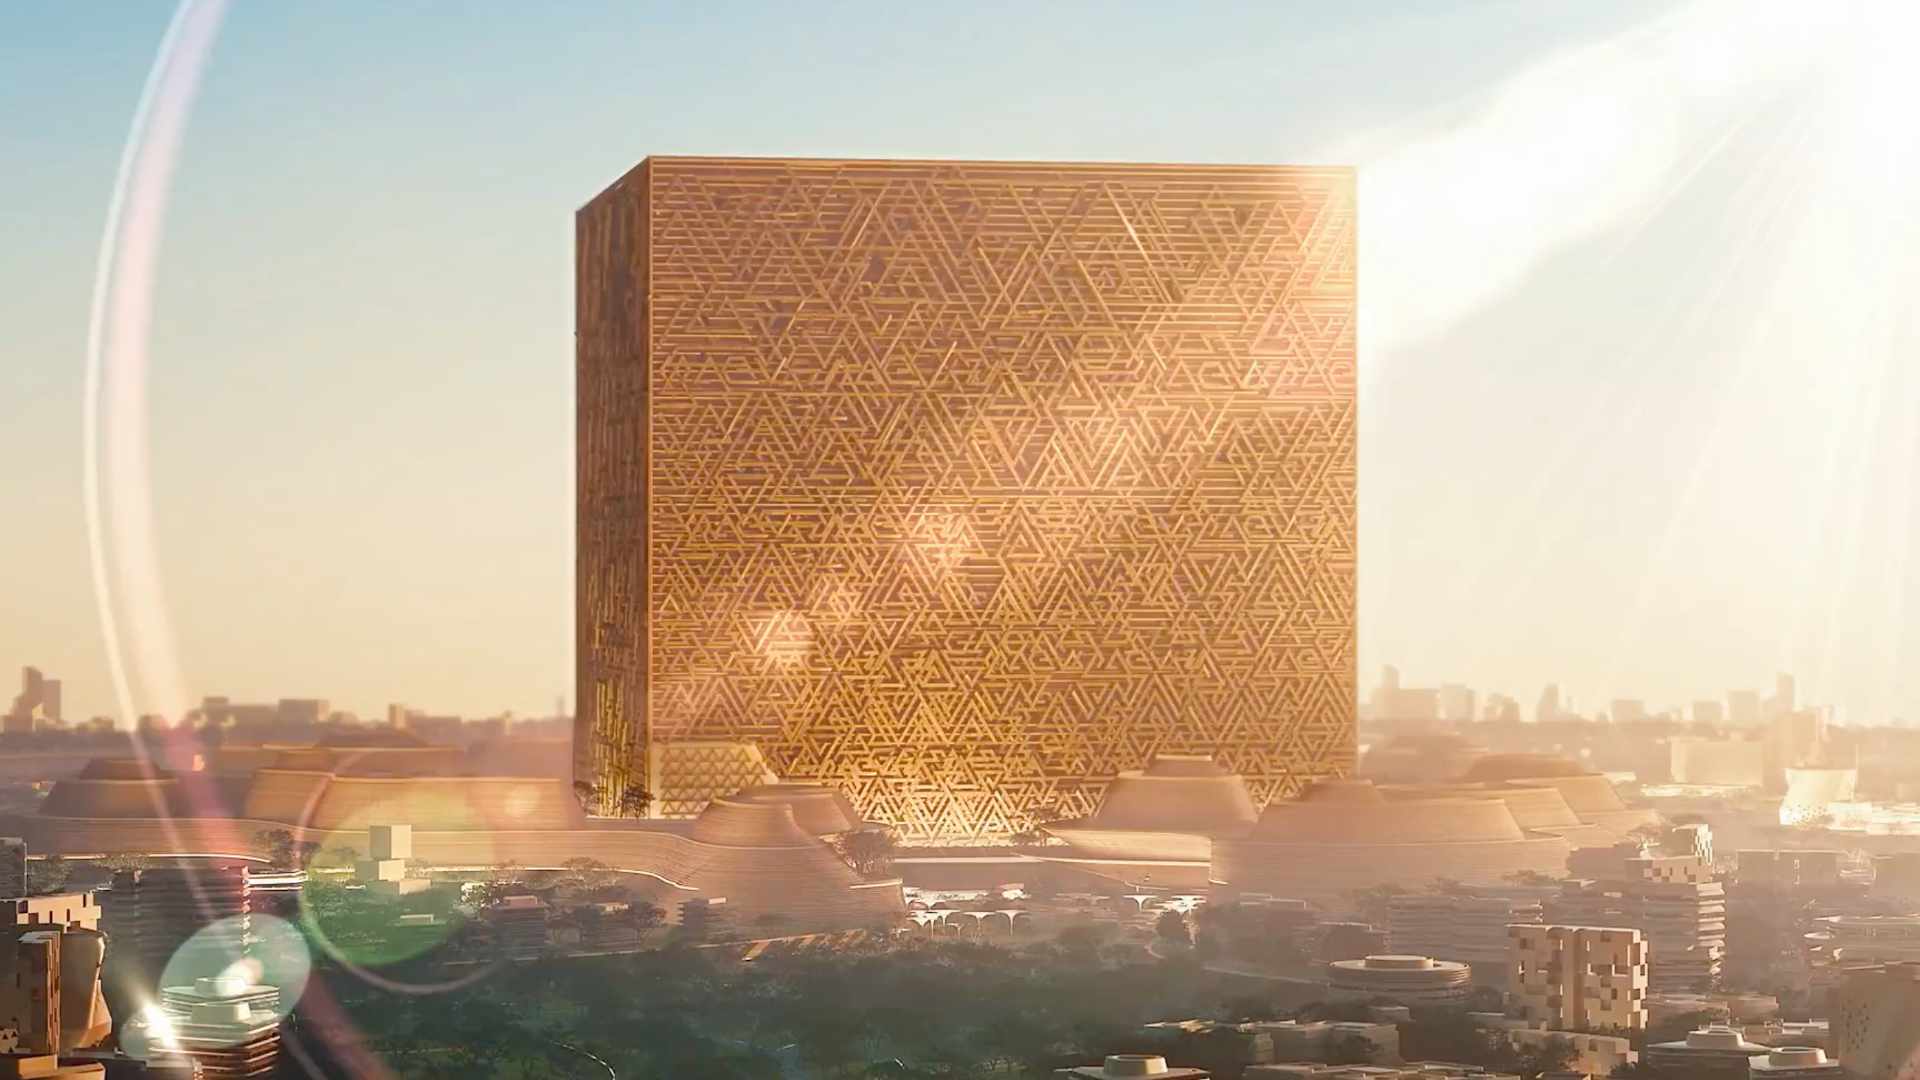 After The Line, Saudi Arabia wants to build a giant cube